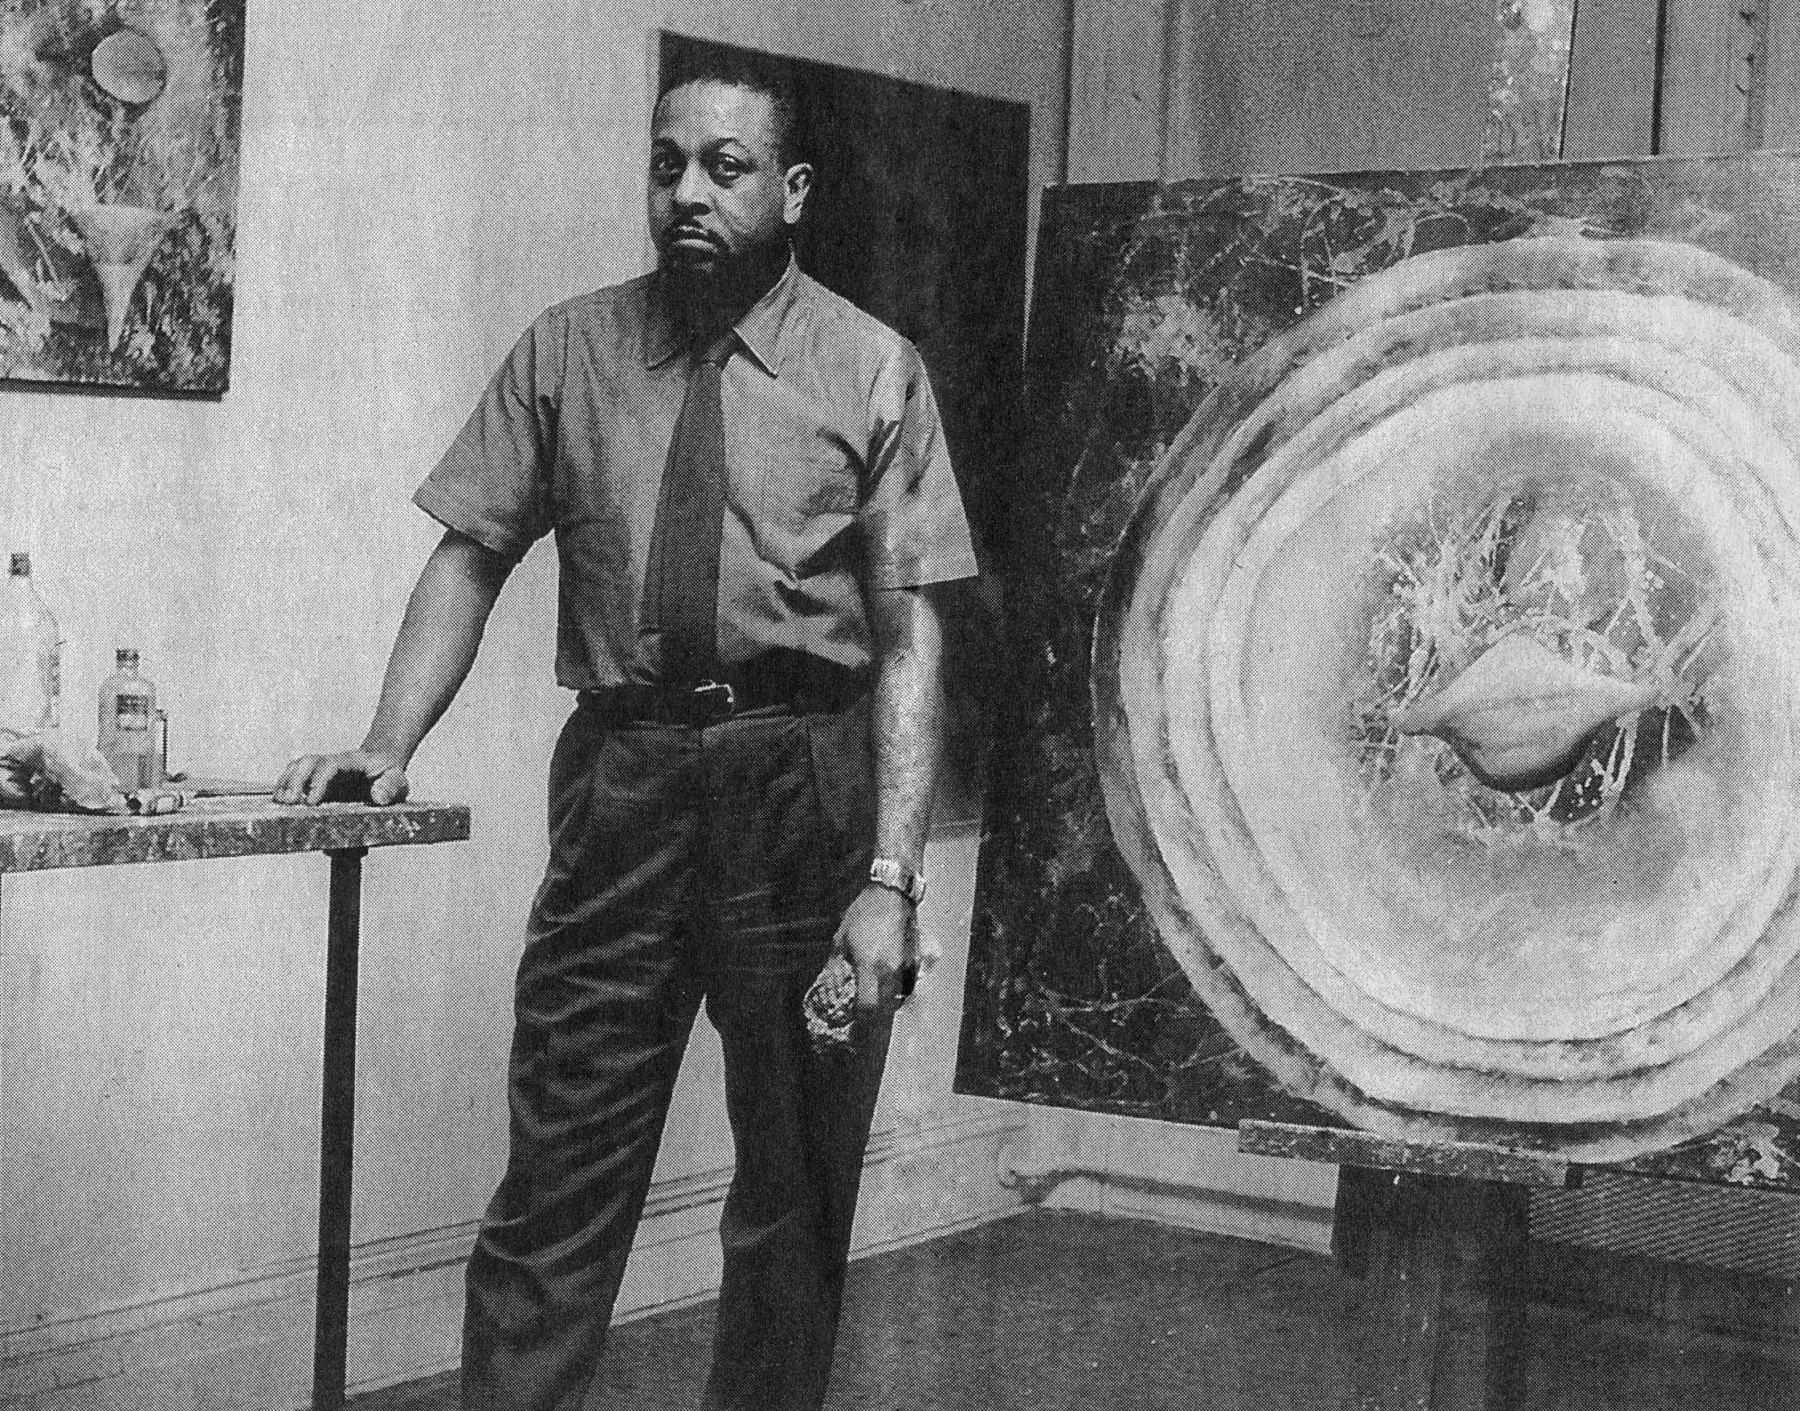 Thomas Sills with paintings in his West 11th St. studio, 1956